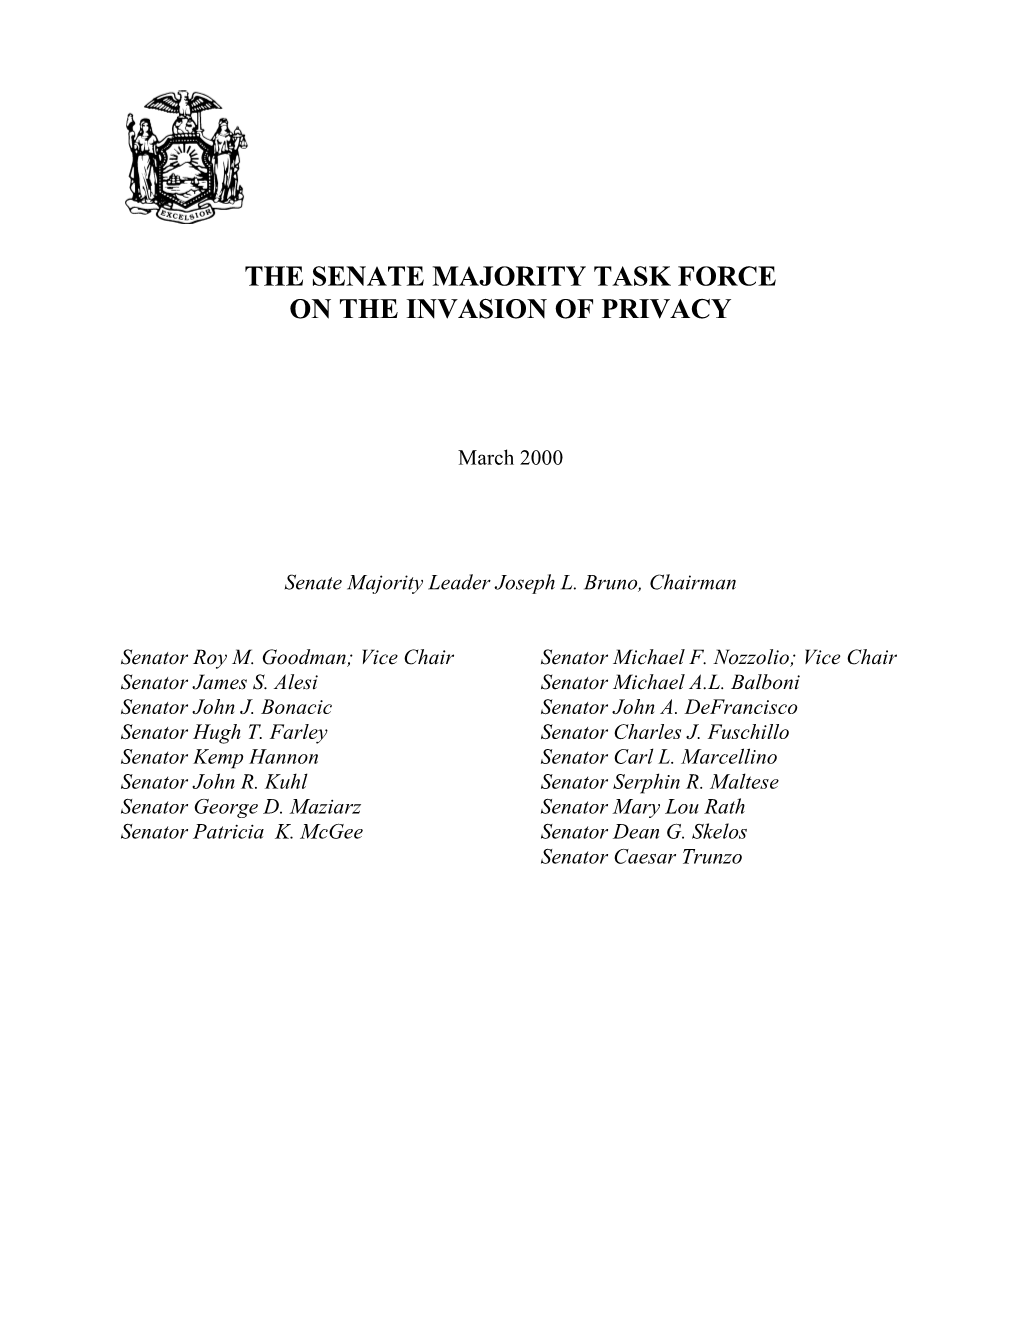 The Senate Majority Task Force on the Invasion of Privacy